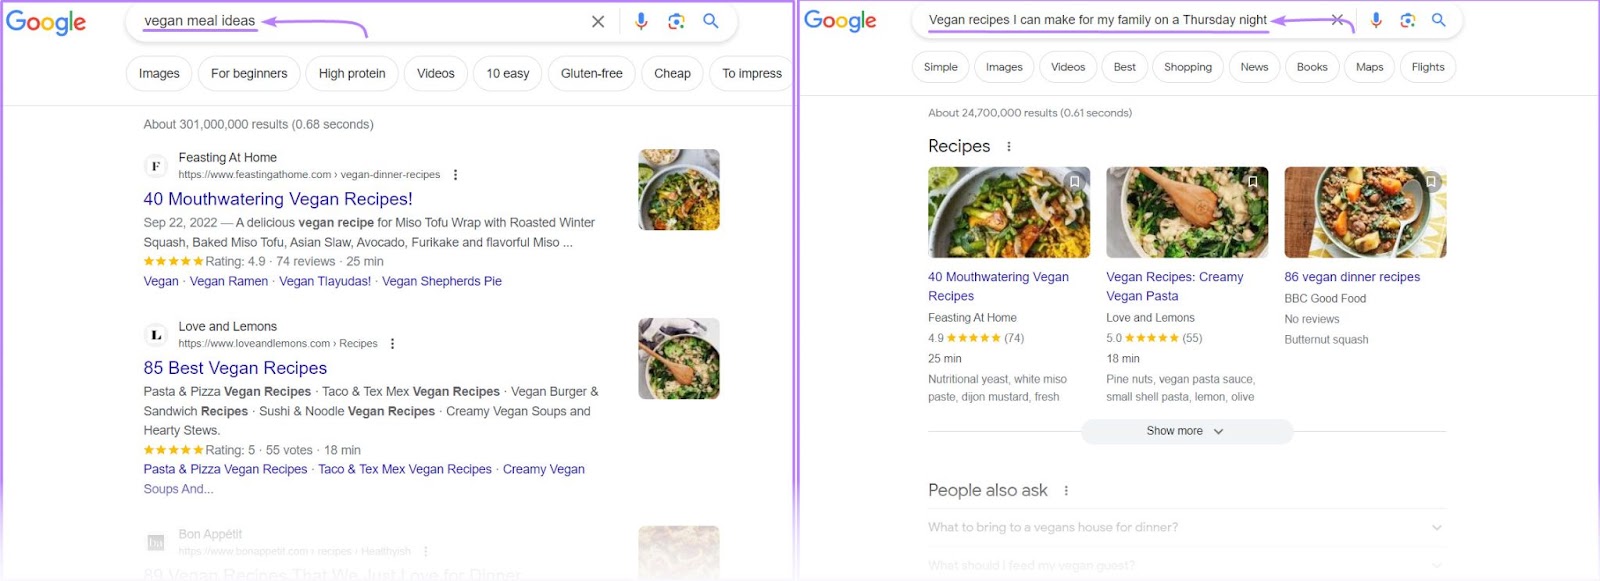 Google's SERP for "vegan meal ideas" and "vegan recipes I can make for my family on a Thursday night"